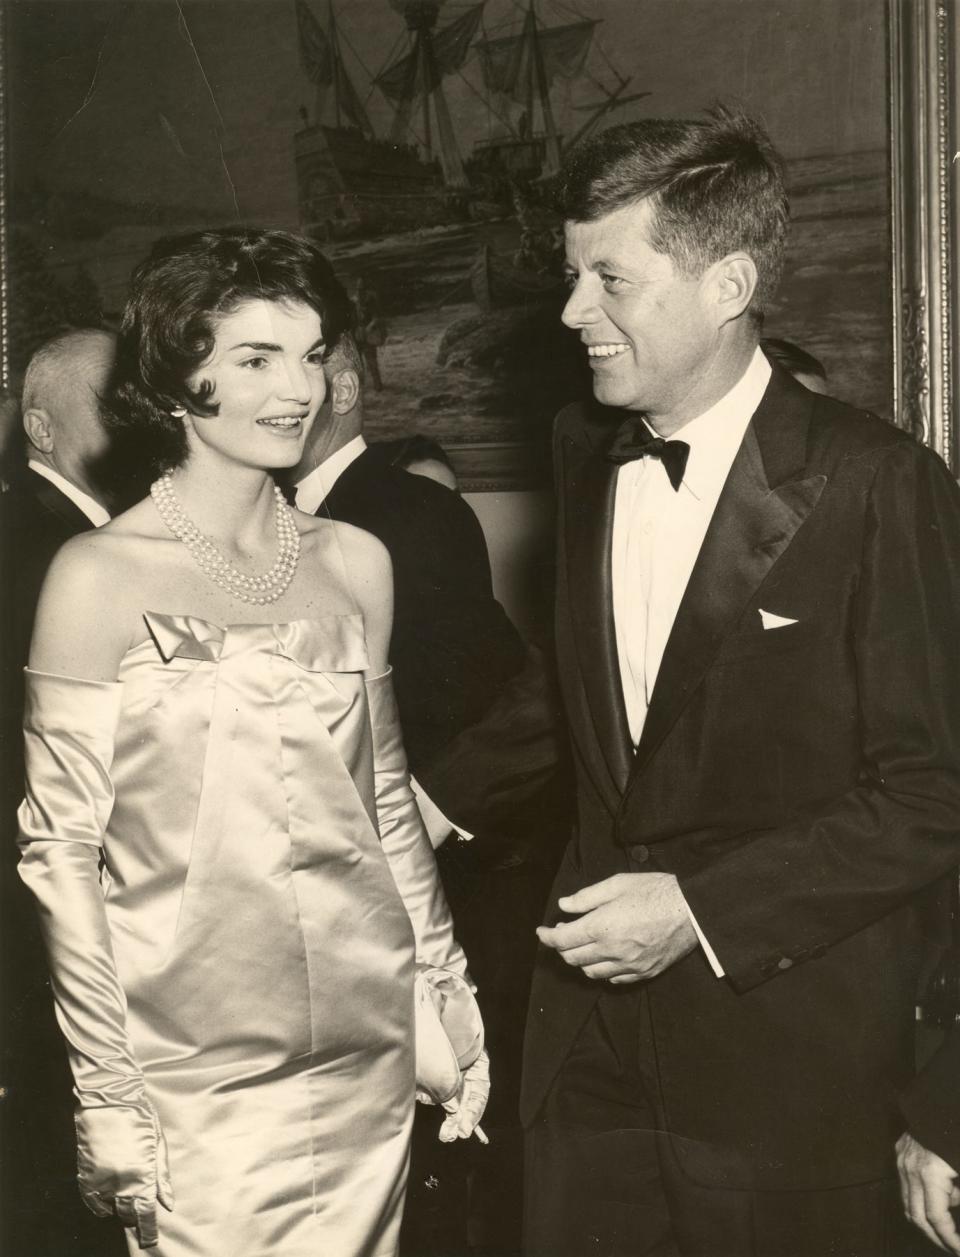 Jackie and JFK at a formal event in Palm Beach in the early 1960s.